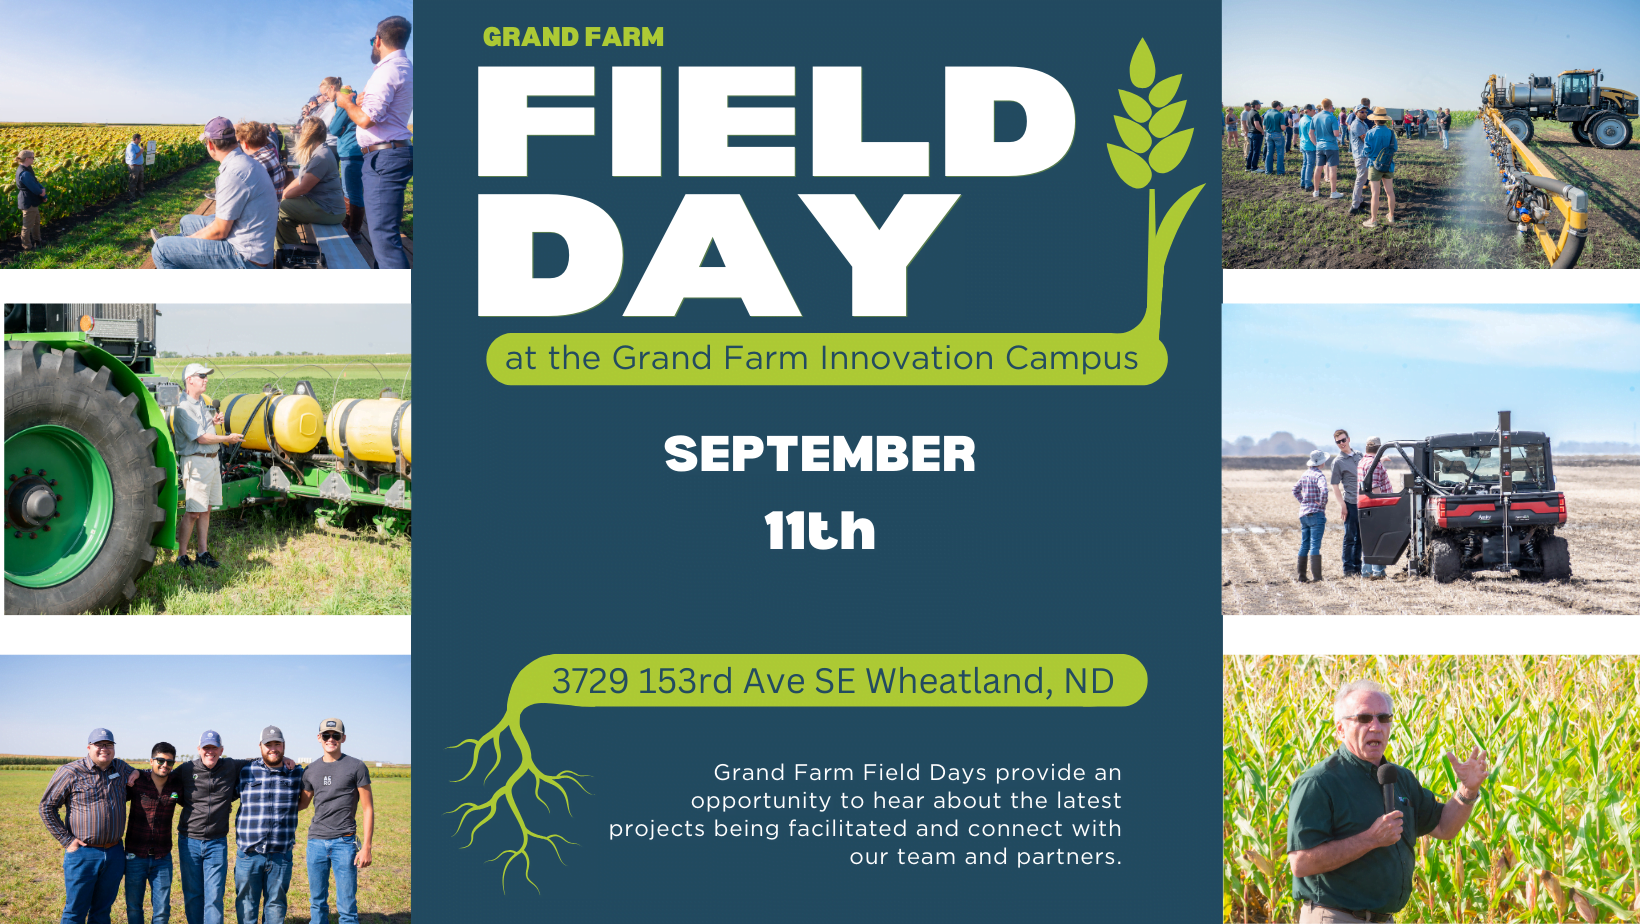 Field Day at the Grand Farm Innovation Campus on September 11th.